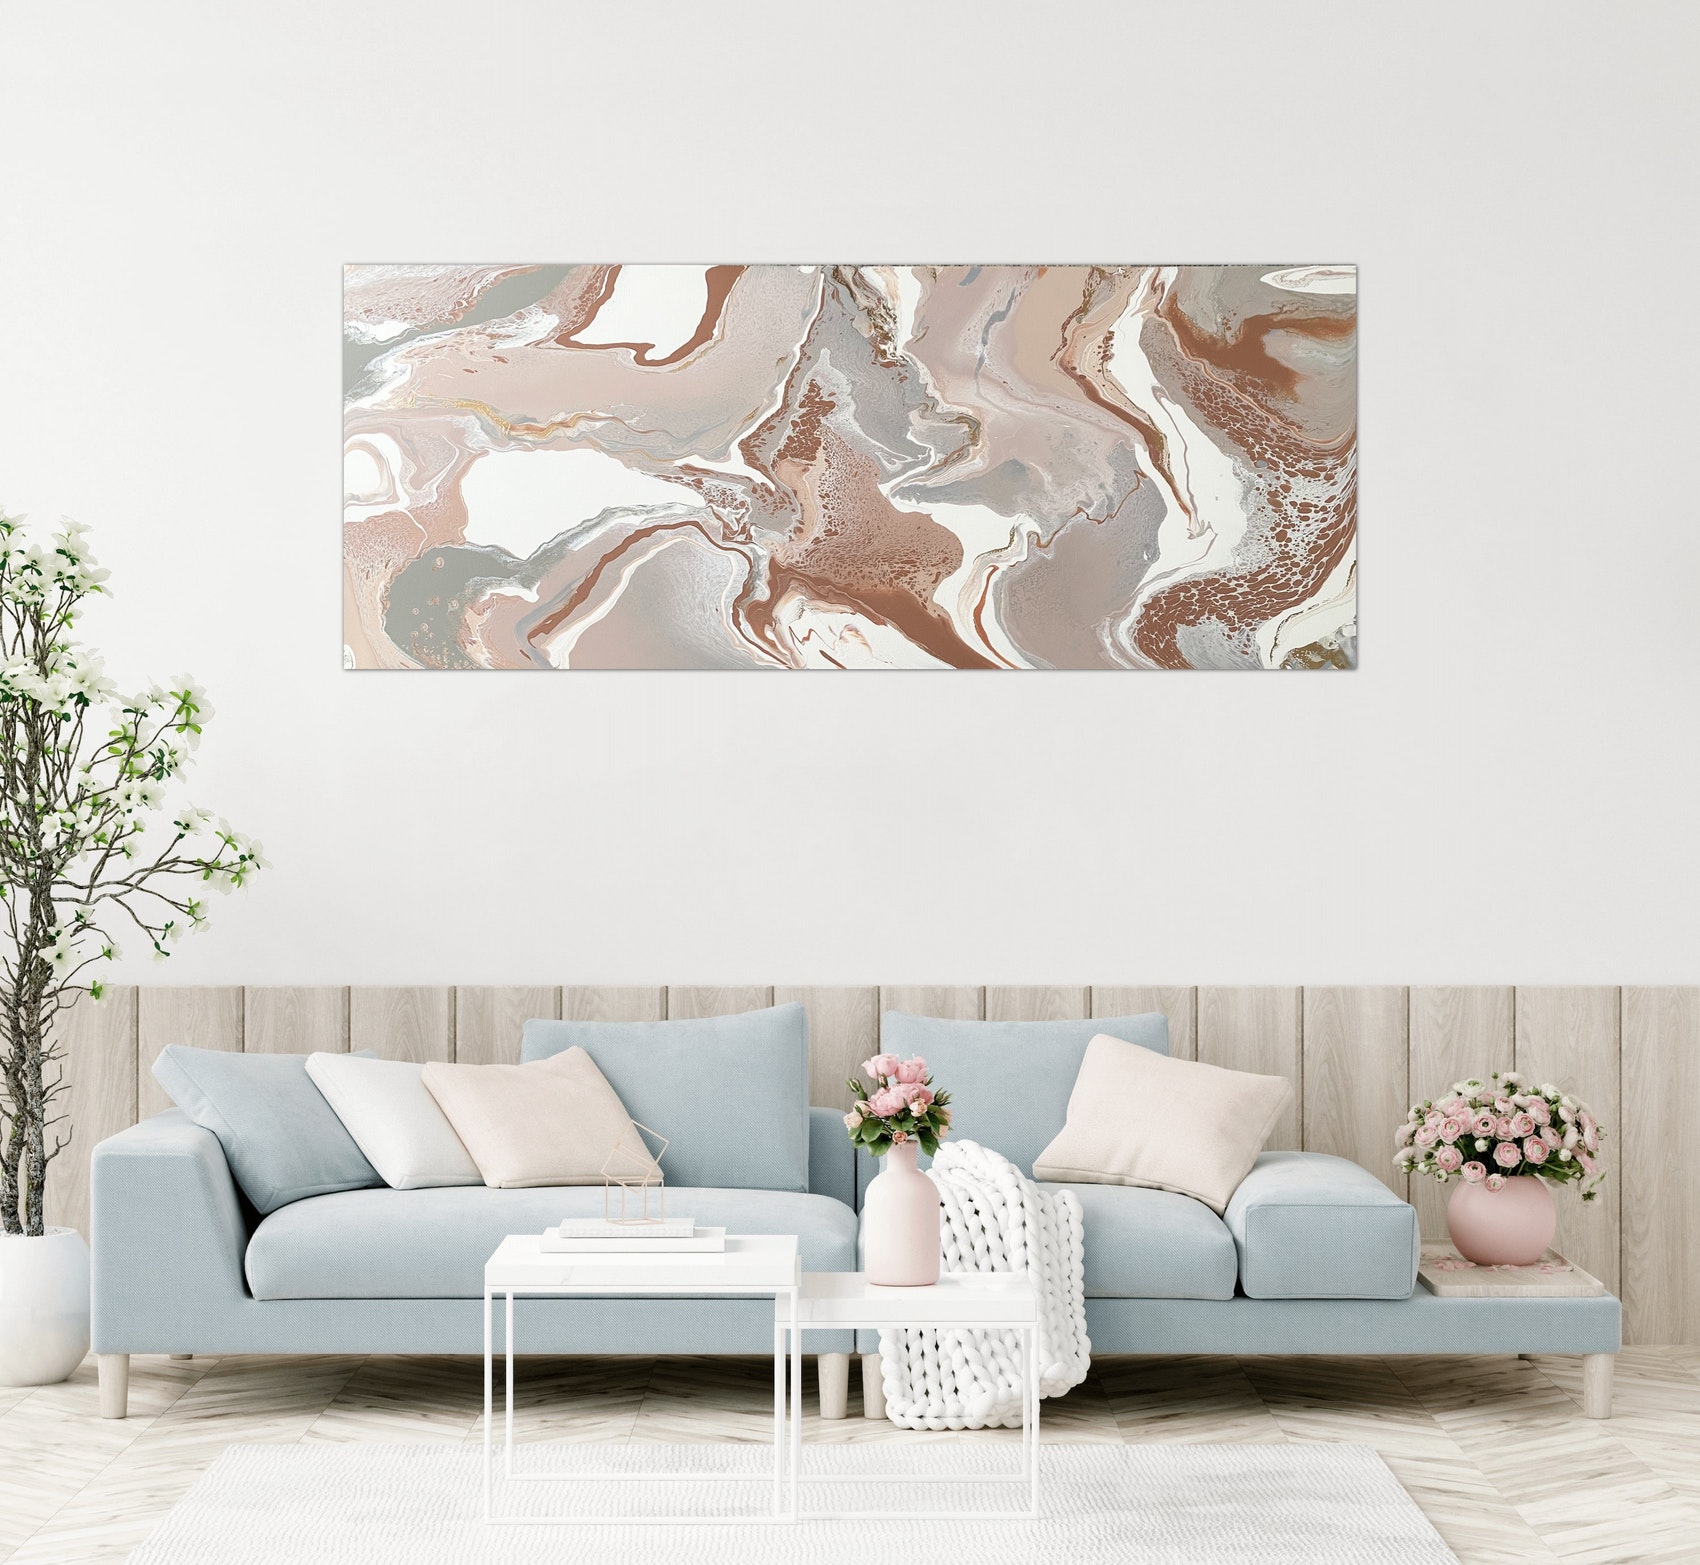 'Bold Winds' (acrylic) by Amber Fisher. A soft, neutral fluid acrylic painting with copper tones throughout. Art.